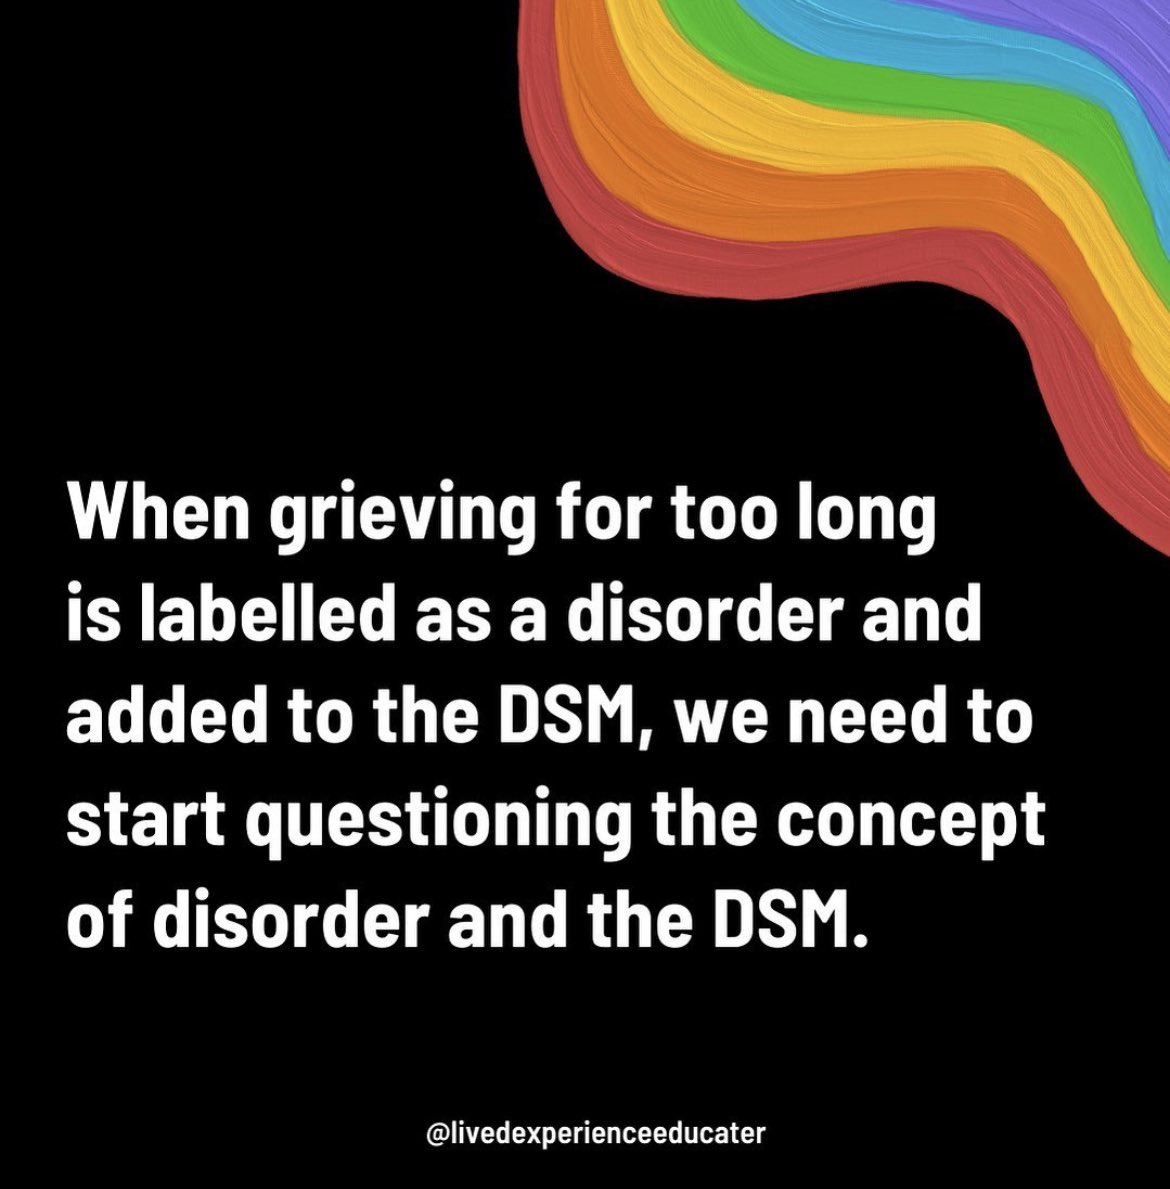 When the label of disorder is required to gain access to support for grieving, should we be questioning the entire concept?